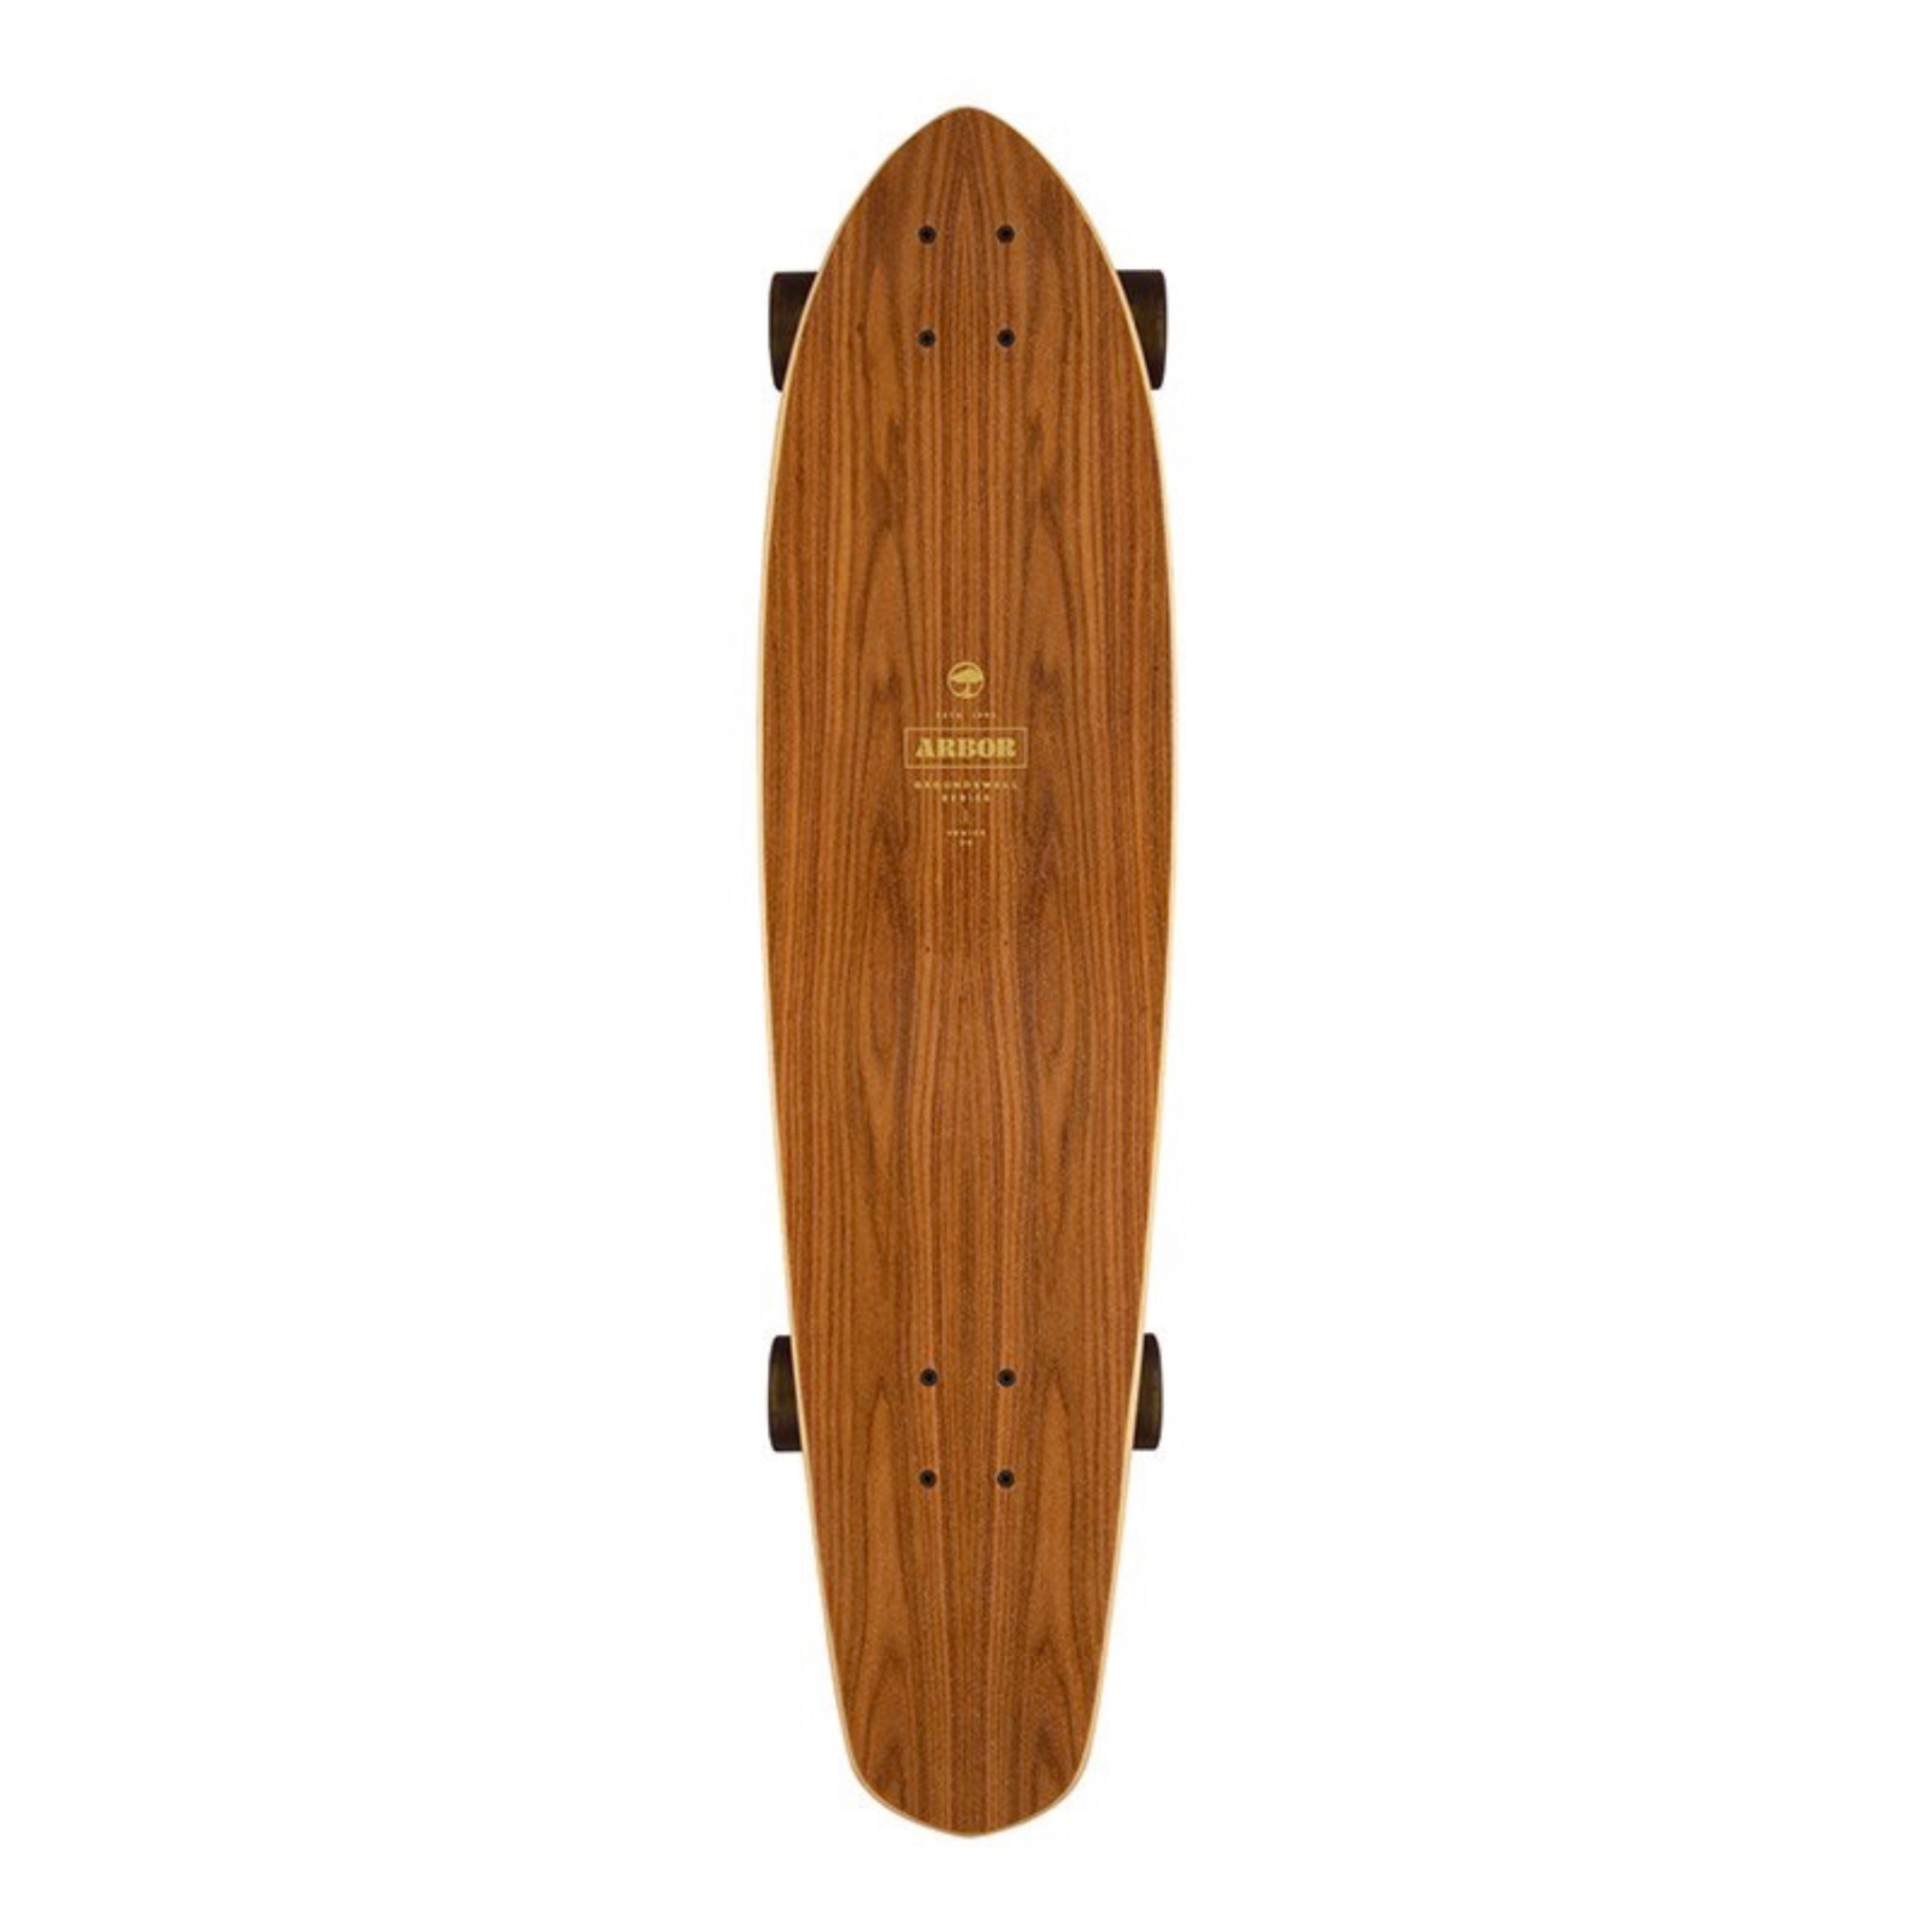 Arbor Performance Complete Groundswell Mission Multi 35" Skateboard